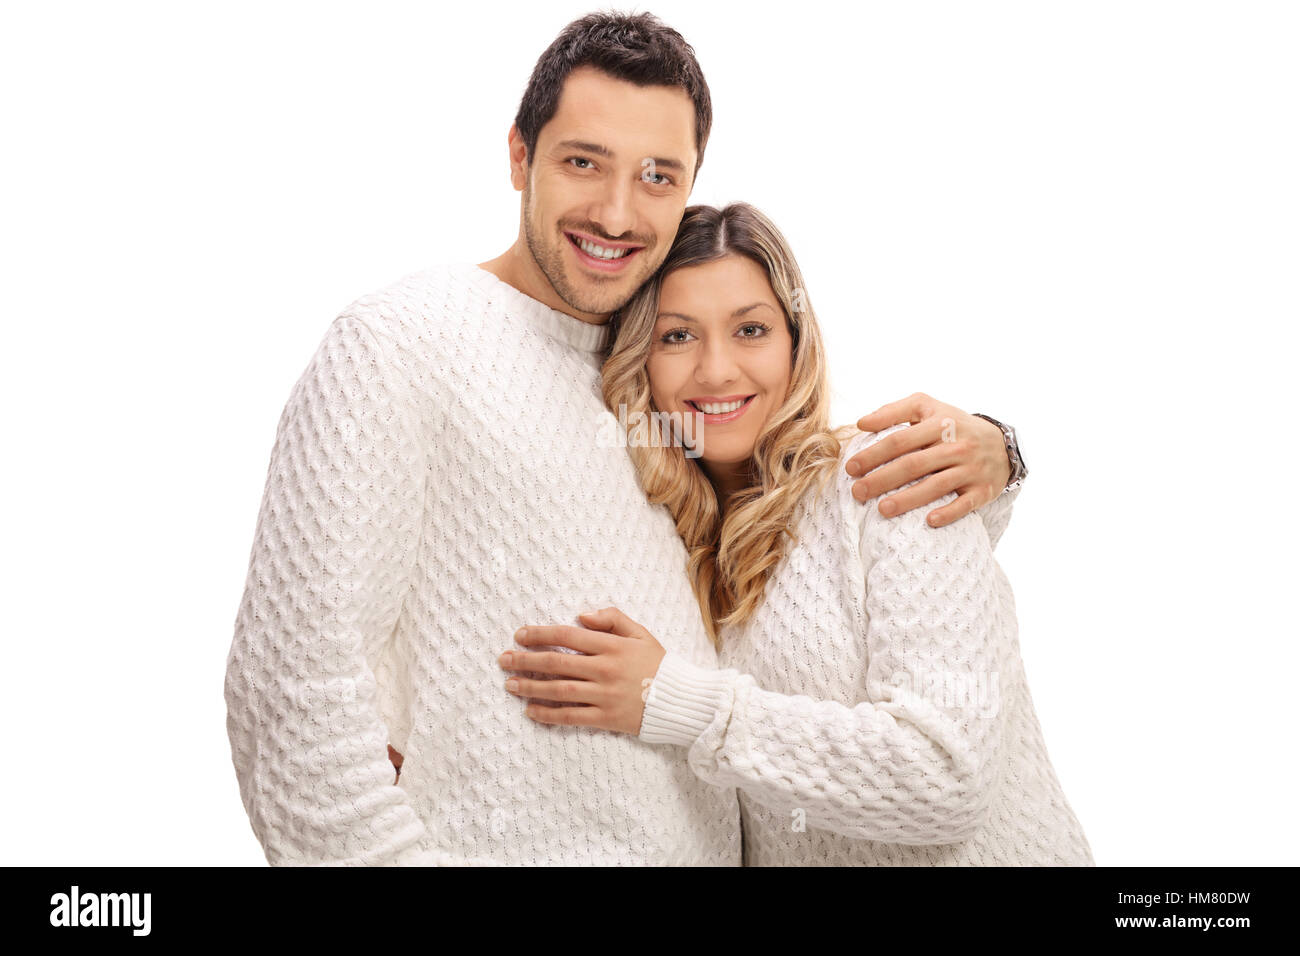 Happy young couple in an embrace isolated on white background Stock Photo